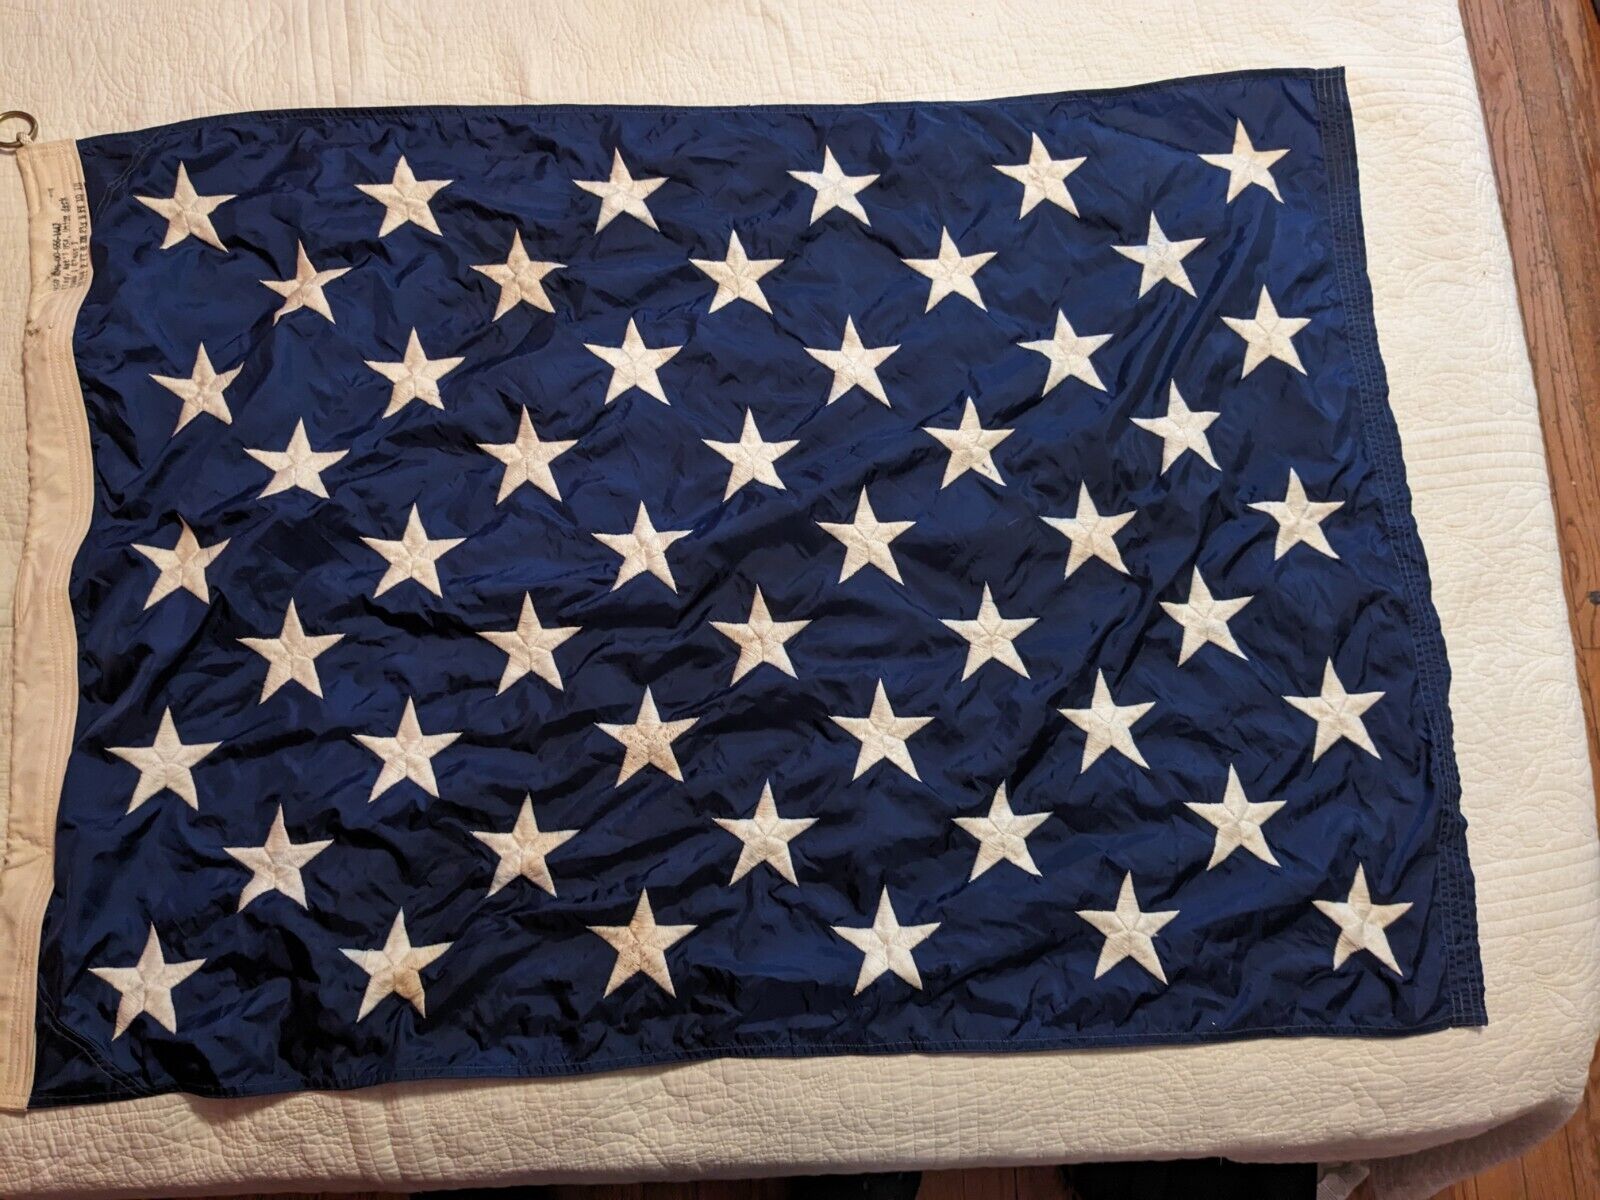 US Navy Union Jack Flag. CV-64 USS Constellation. 44 inches by 31 inches.